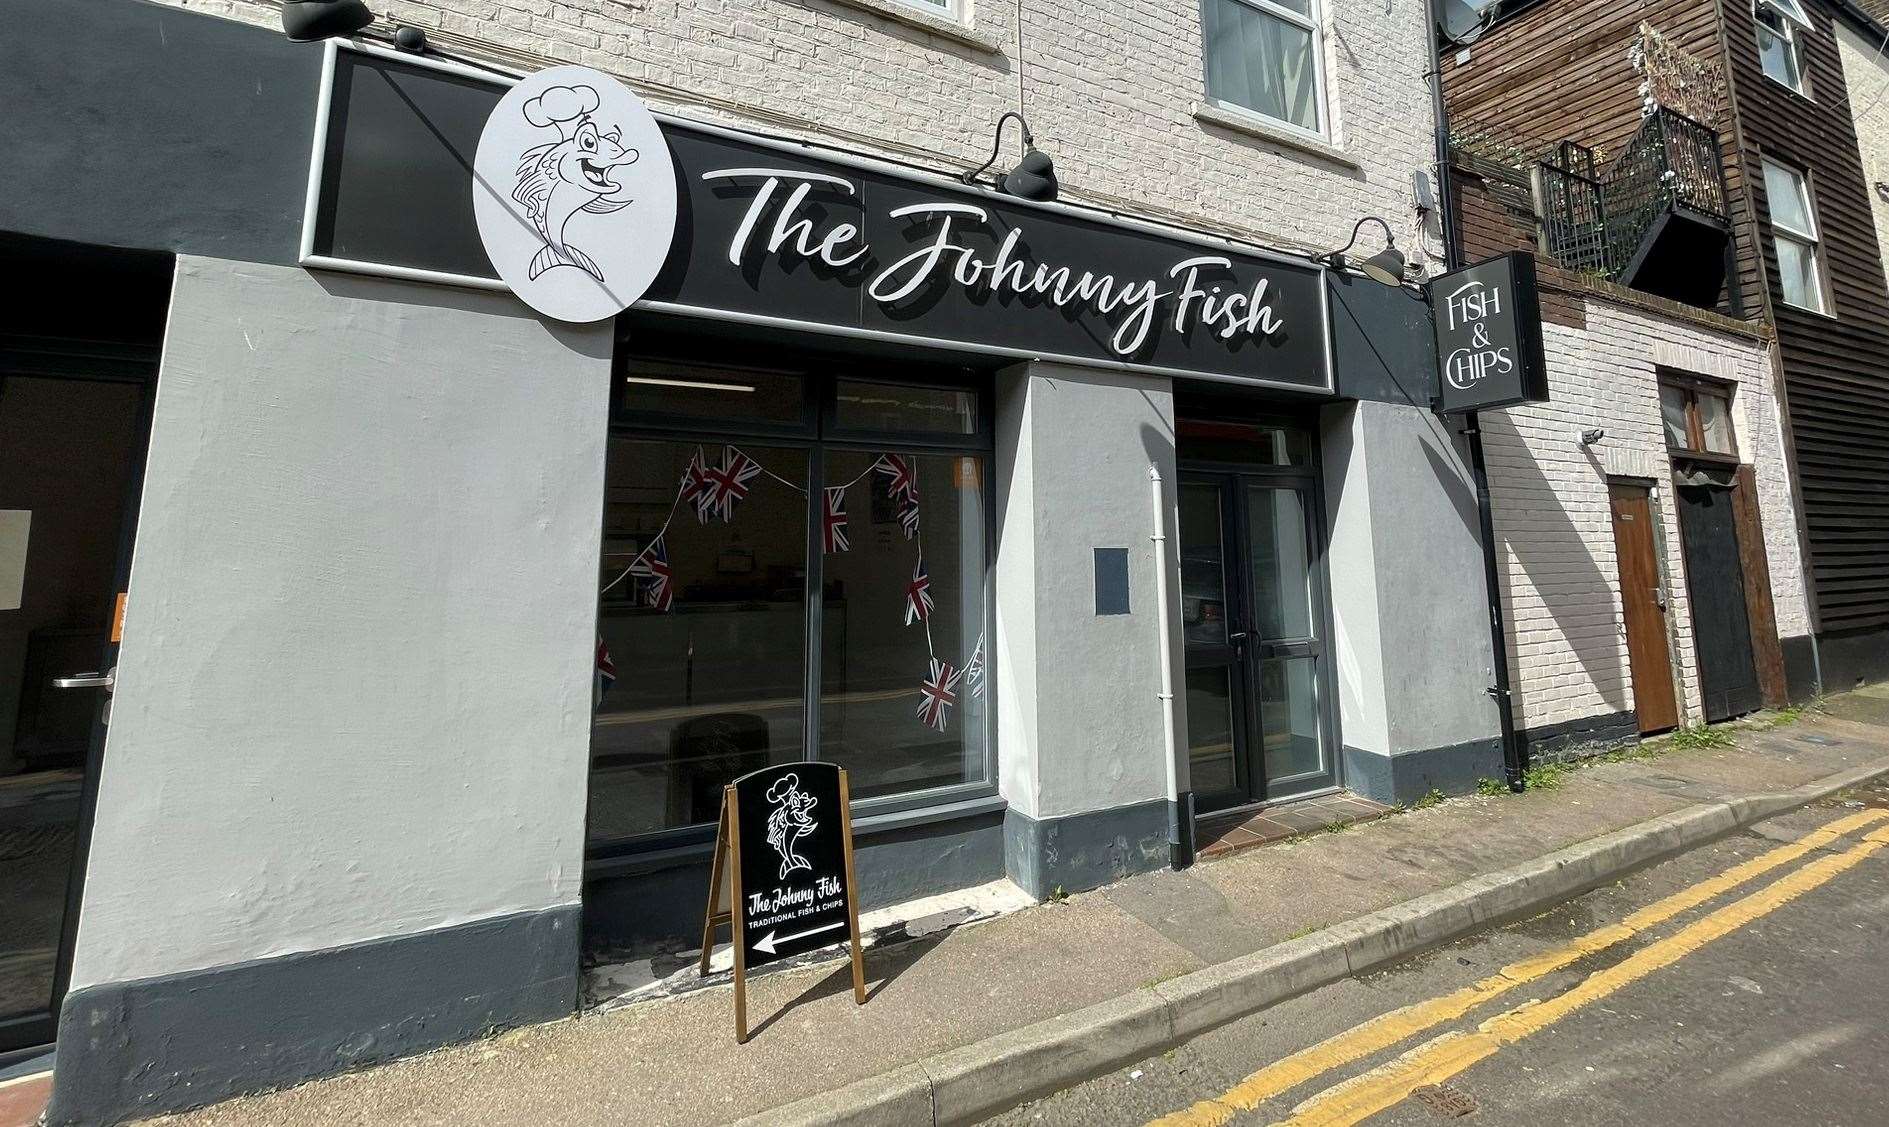 The Johnny Fish in Russell Street, Sheerness is open for business